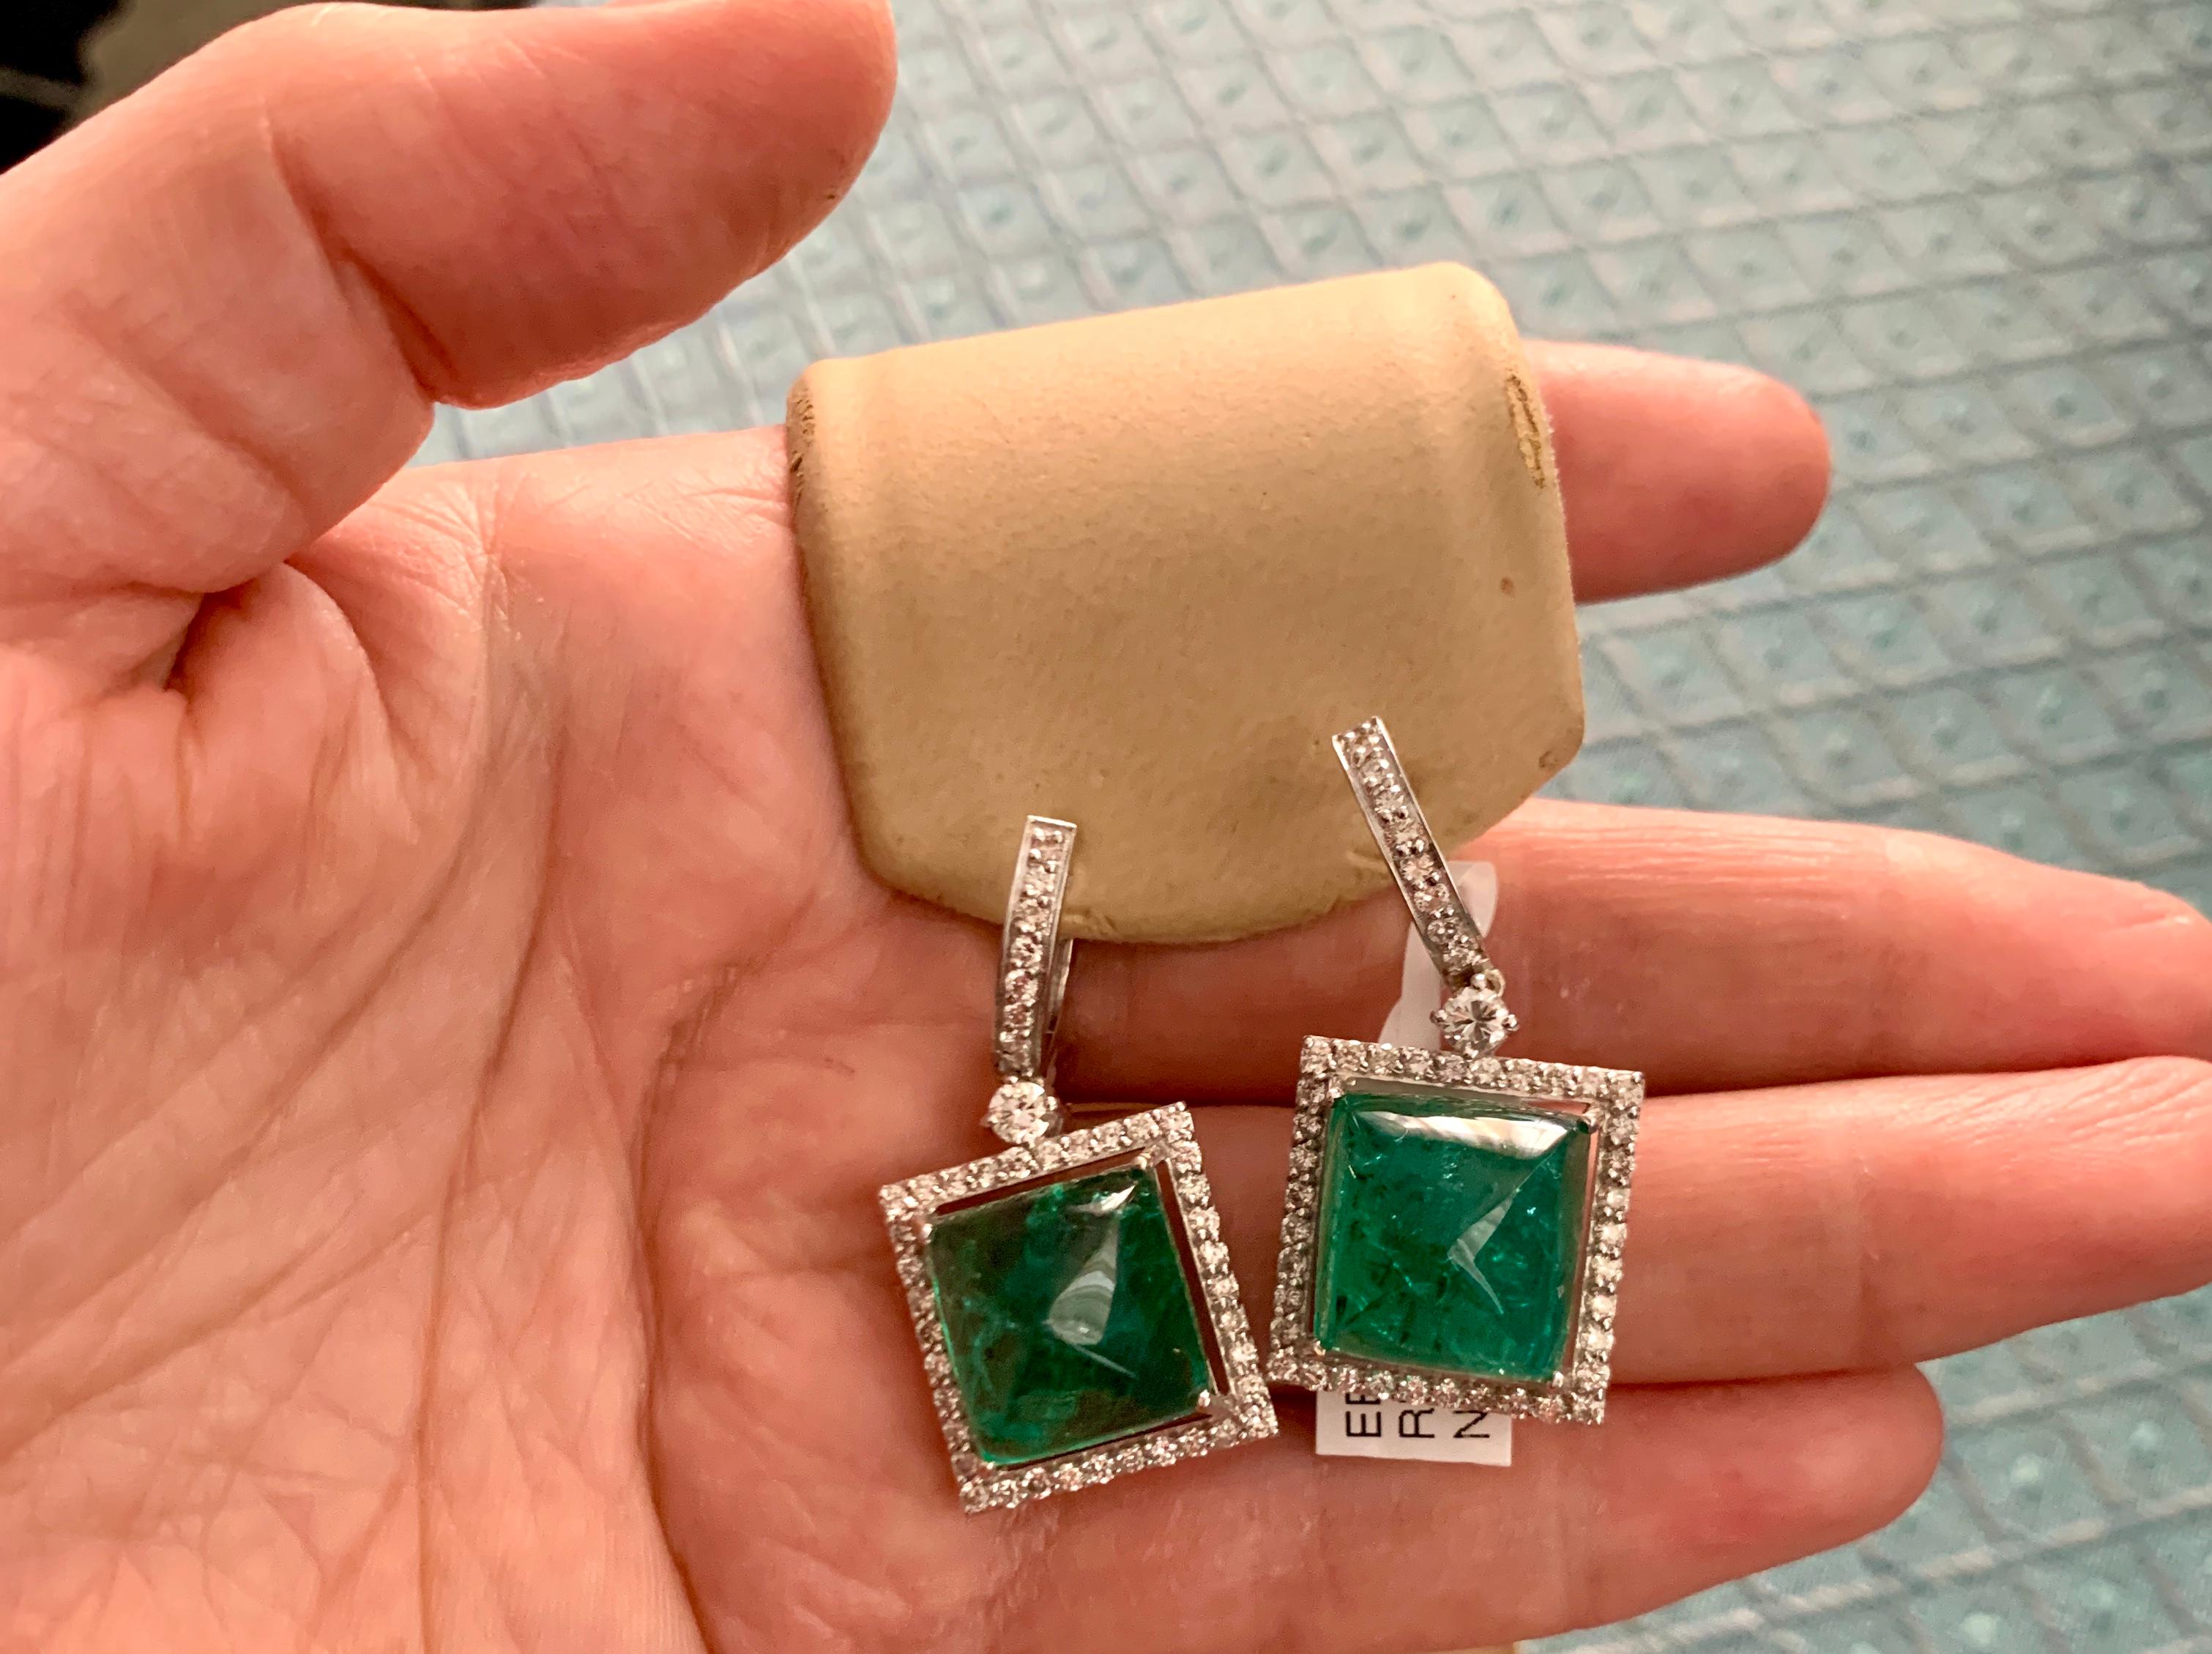 32 Carat Natural Zambian Emerald Sugar loaf Cabochon & Diamond Earrings 18 K G 
Perfect pair  of natural Zambian Emerald earring.
Almost Square 1.5 Cm on each side length and width , this Sugar Loaf earrings are spectacular.
Each emerald is